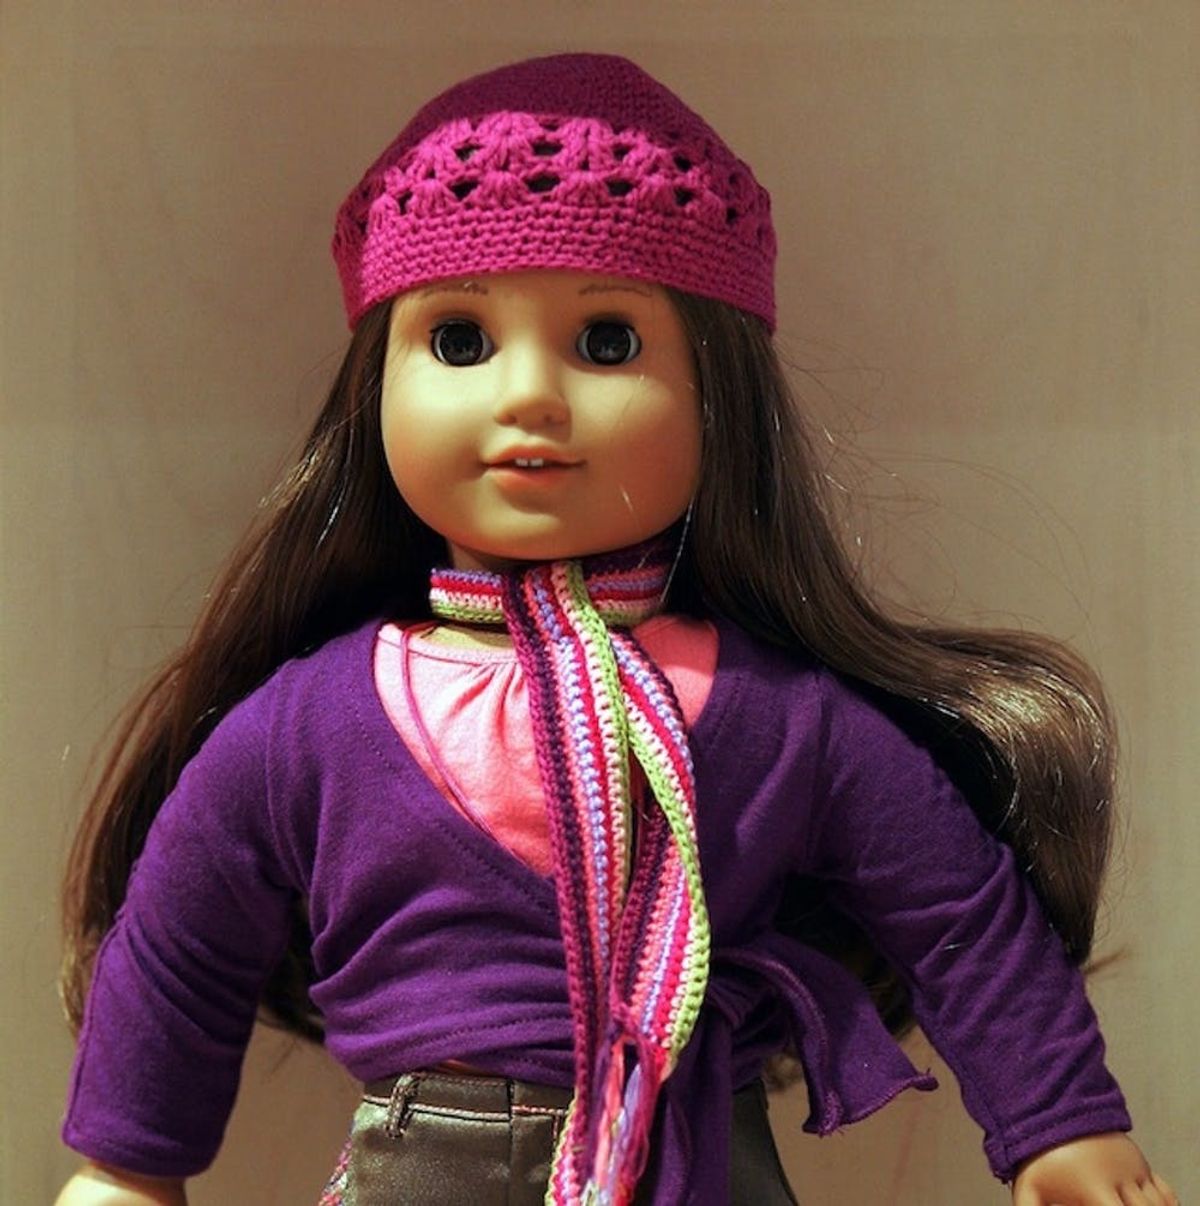 Nostalgia Alert: The American Girl Action Movie You Never Knew You Needed